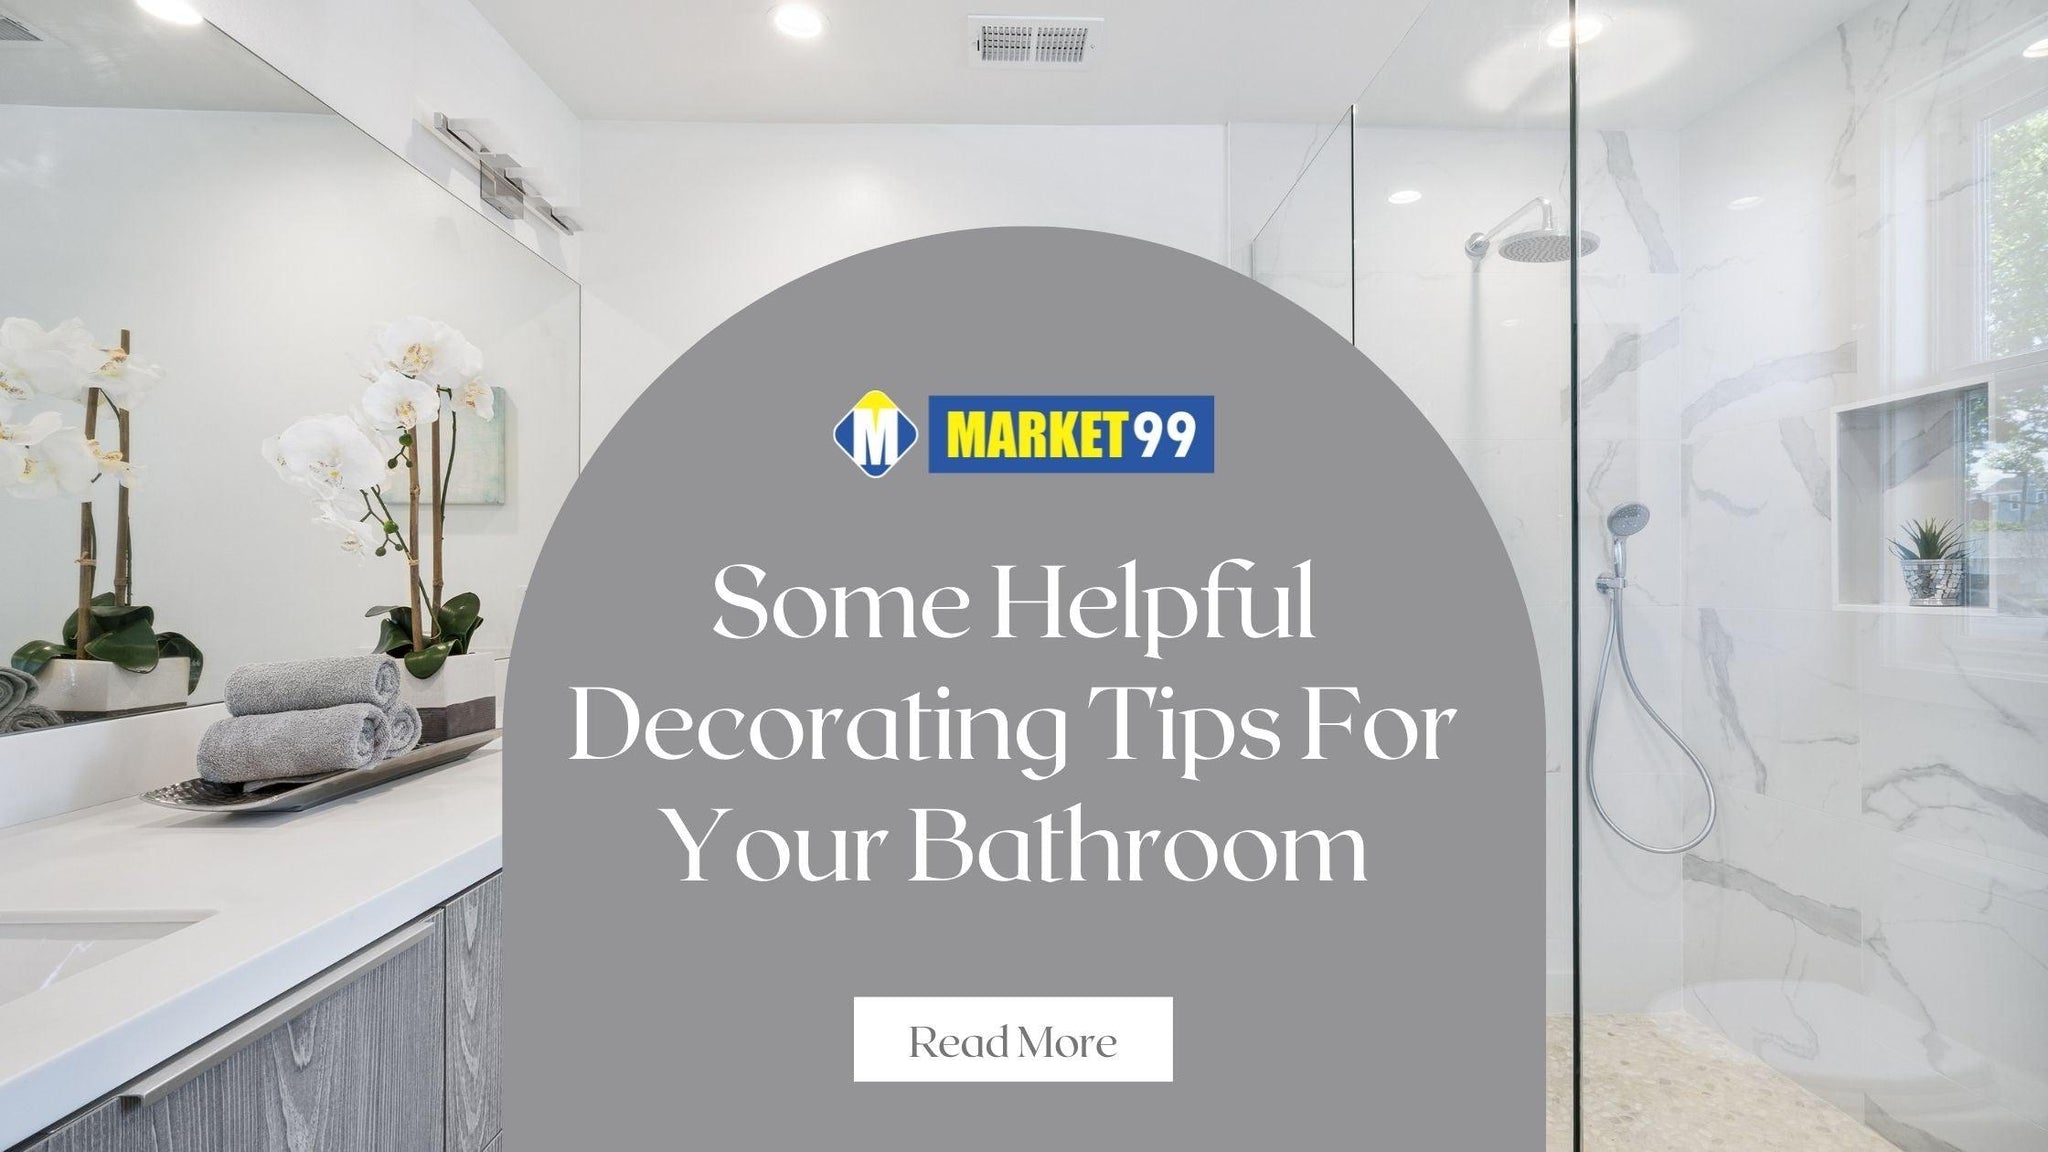 Some Helpful Decorating Tips For Your Bathroom